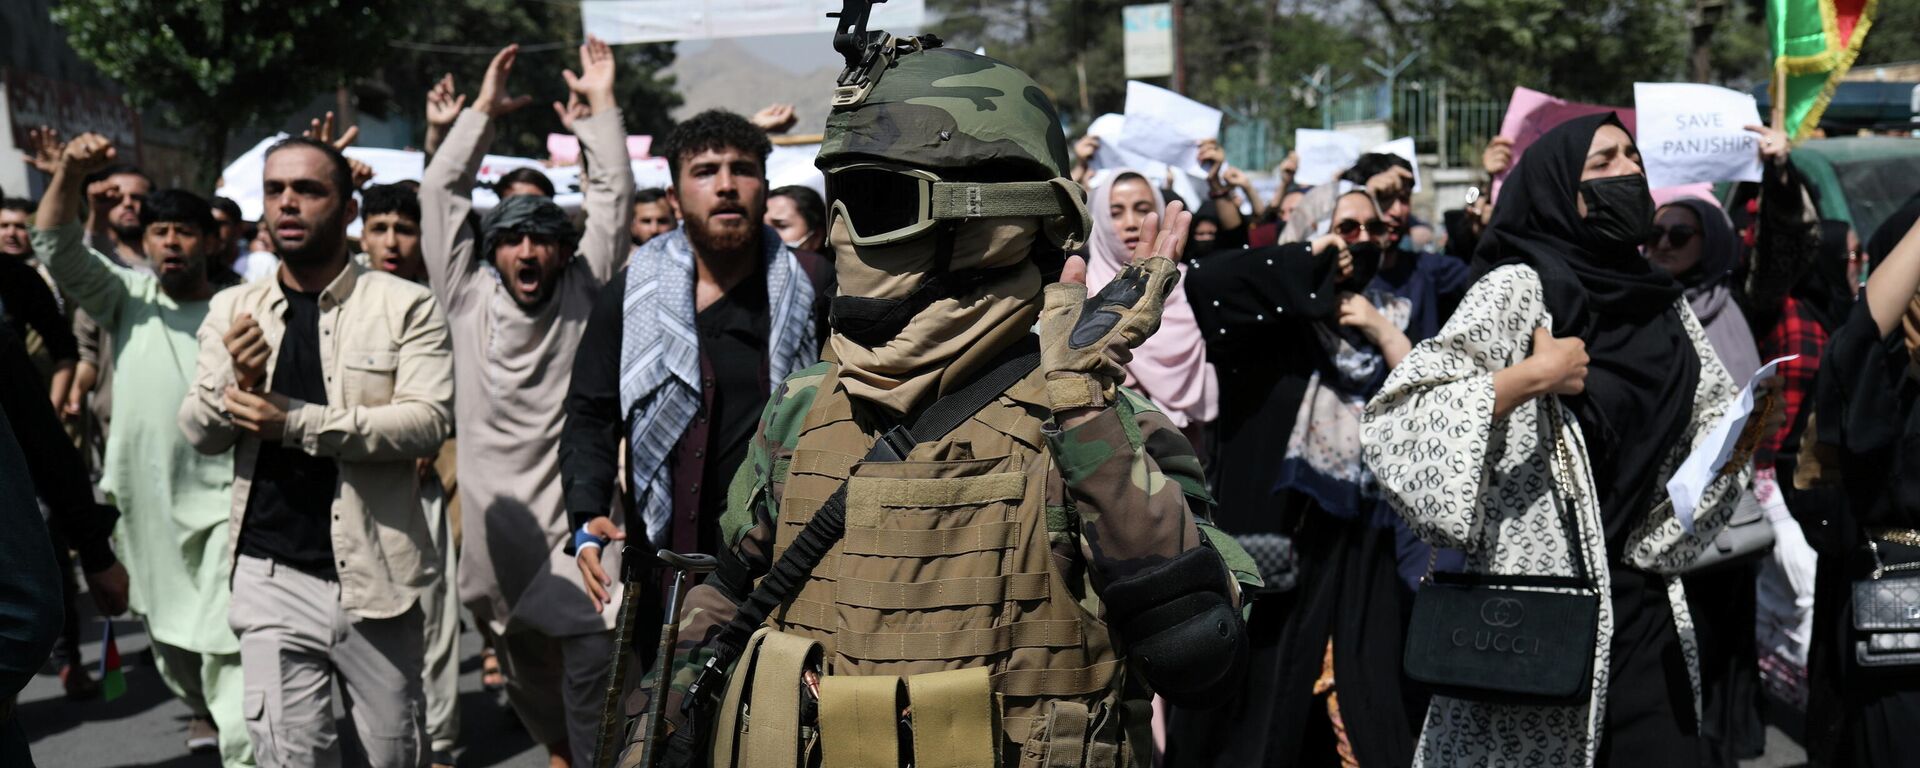 Taliban soldier in combat gear stands amid the protesters during the anti-Pakistan protest in Kabul, Afghanistan, September 7, 2021. - Sputnik International, 1920, 08.09.2021